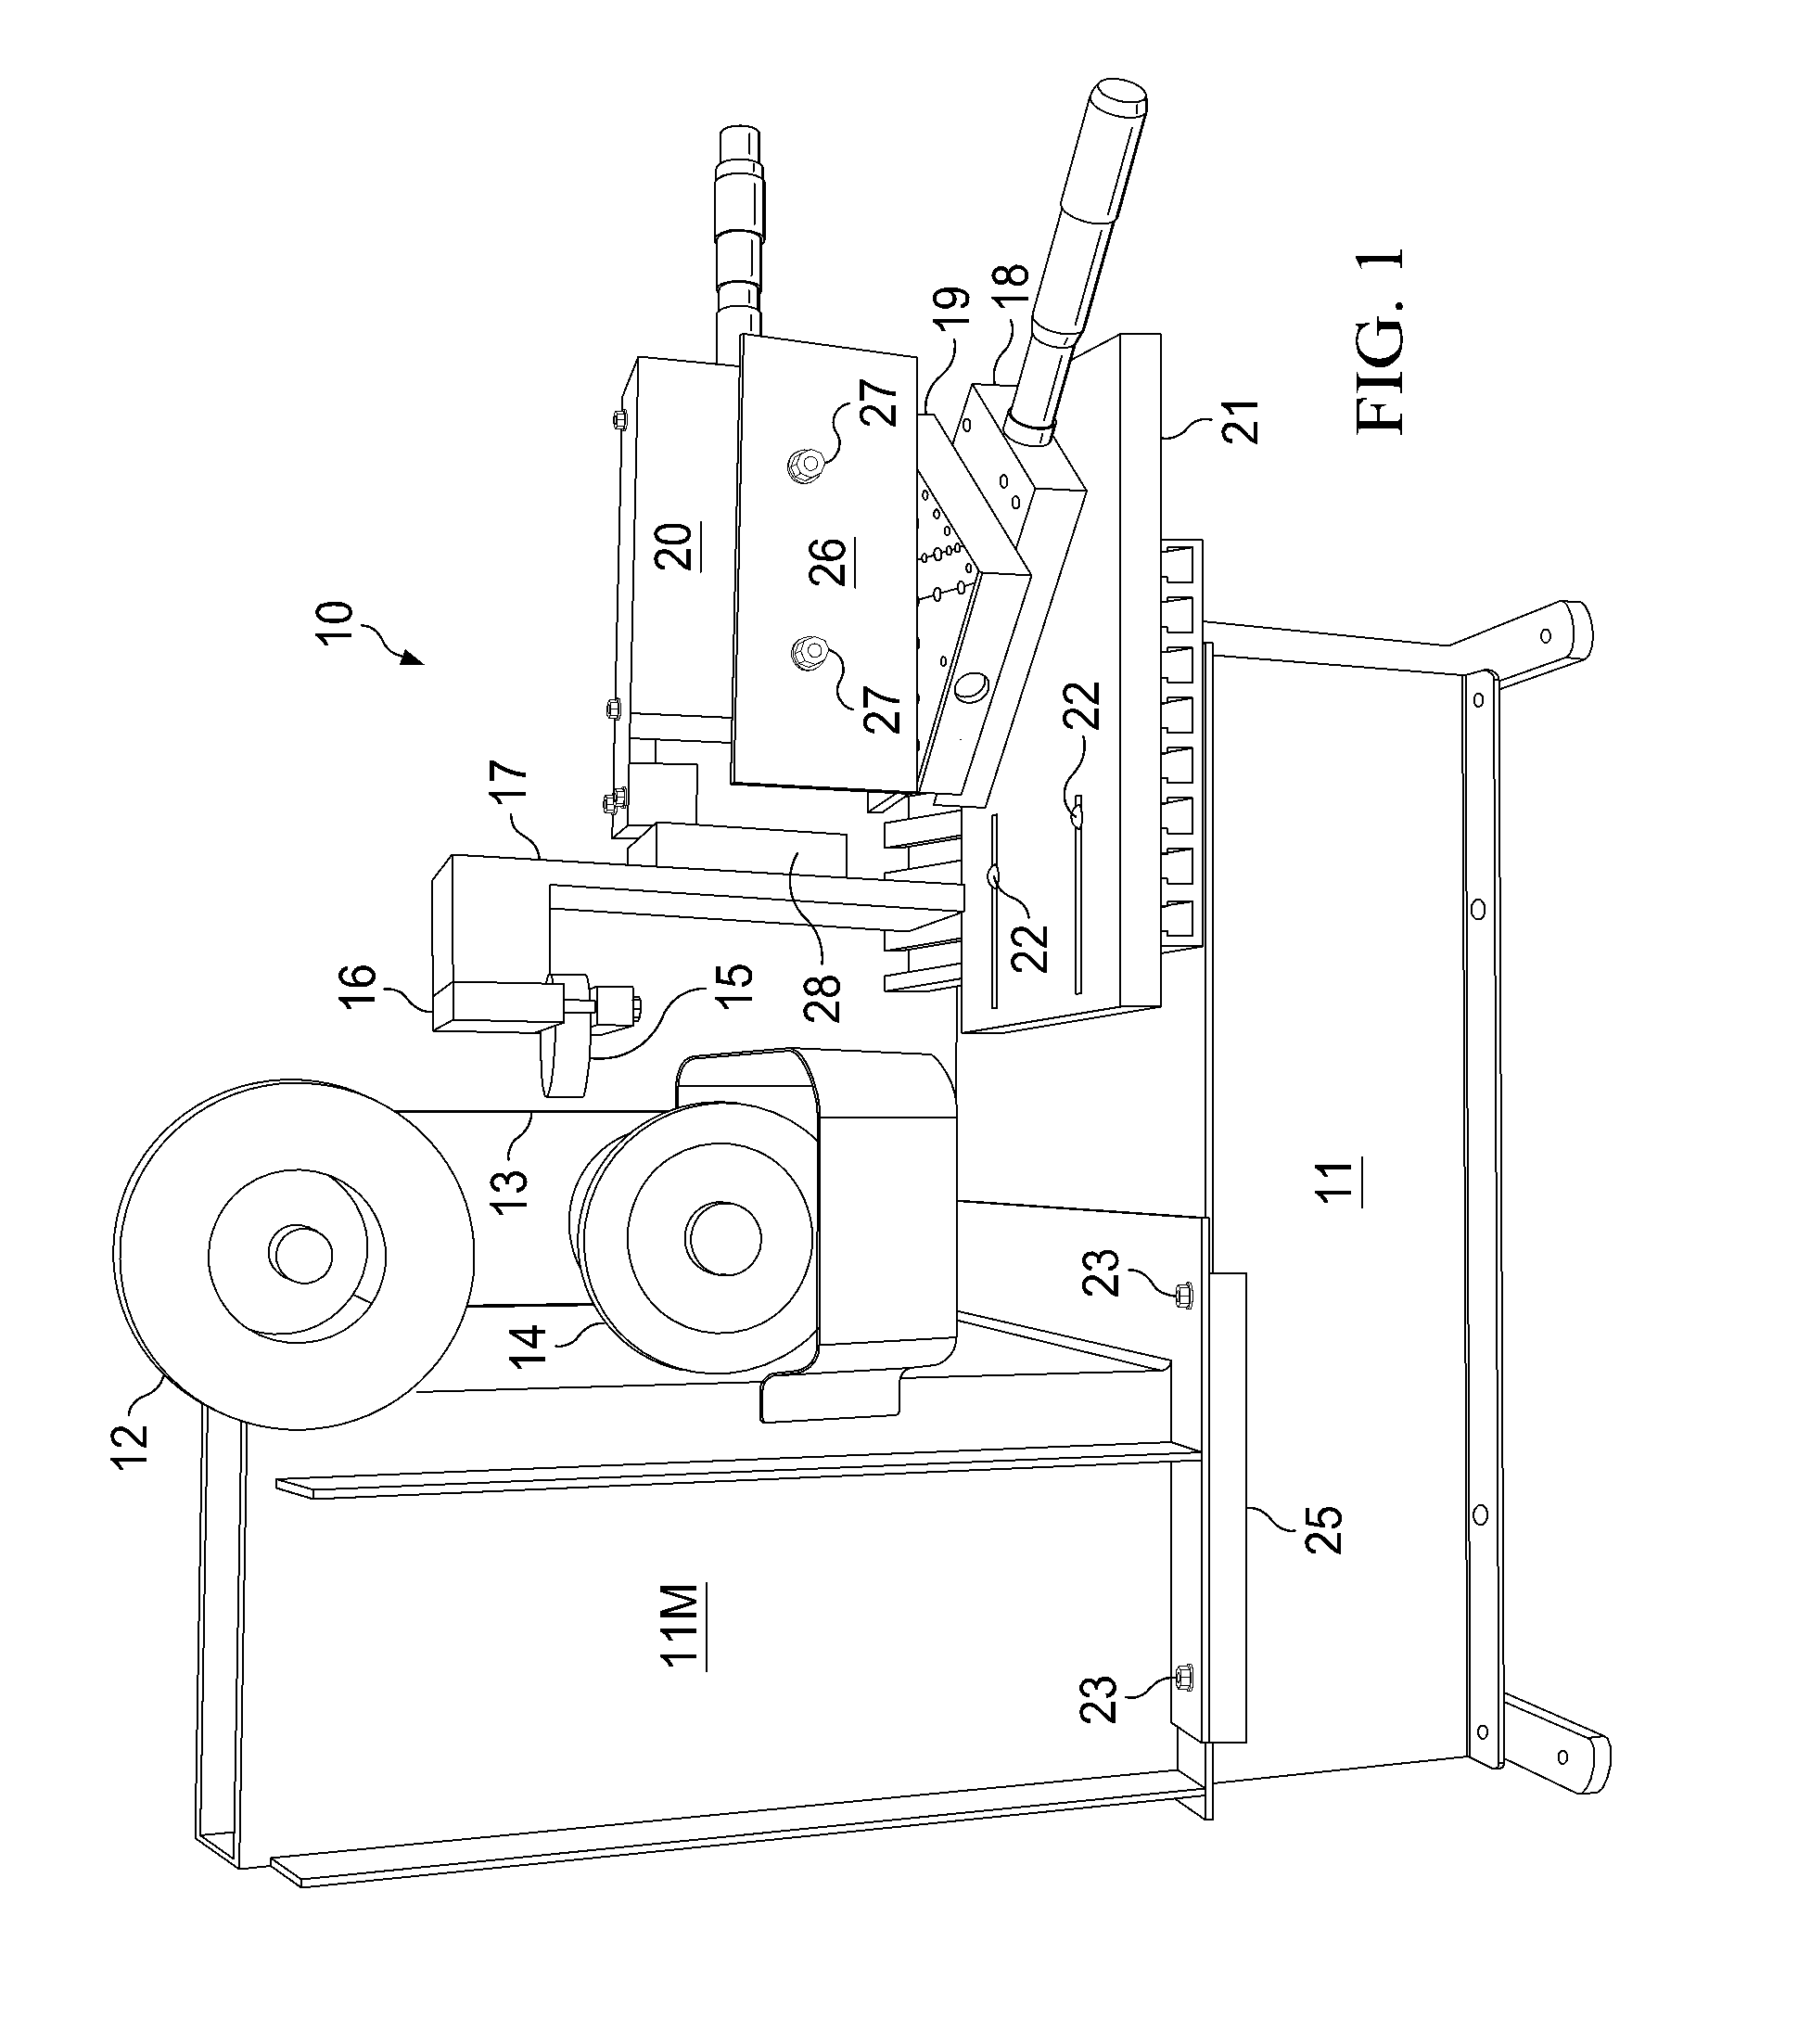 Sample preparation apparatus for direct numerical simulation of rock properties